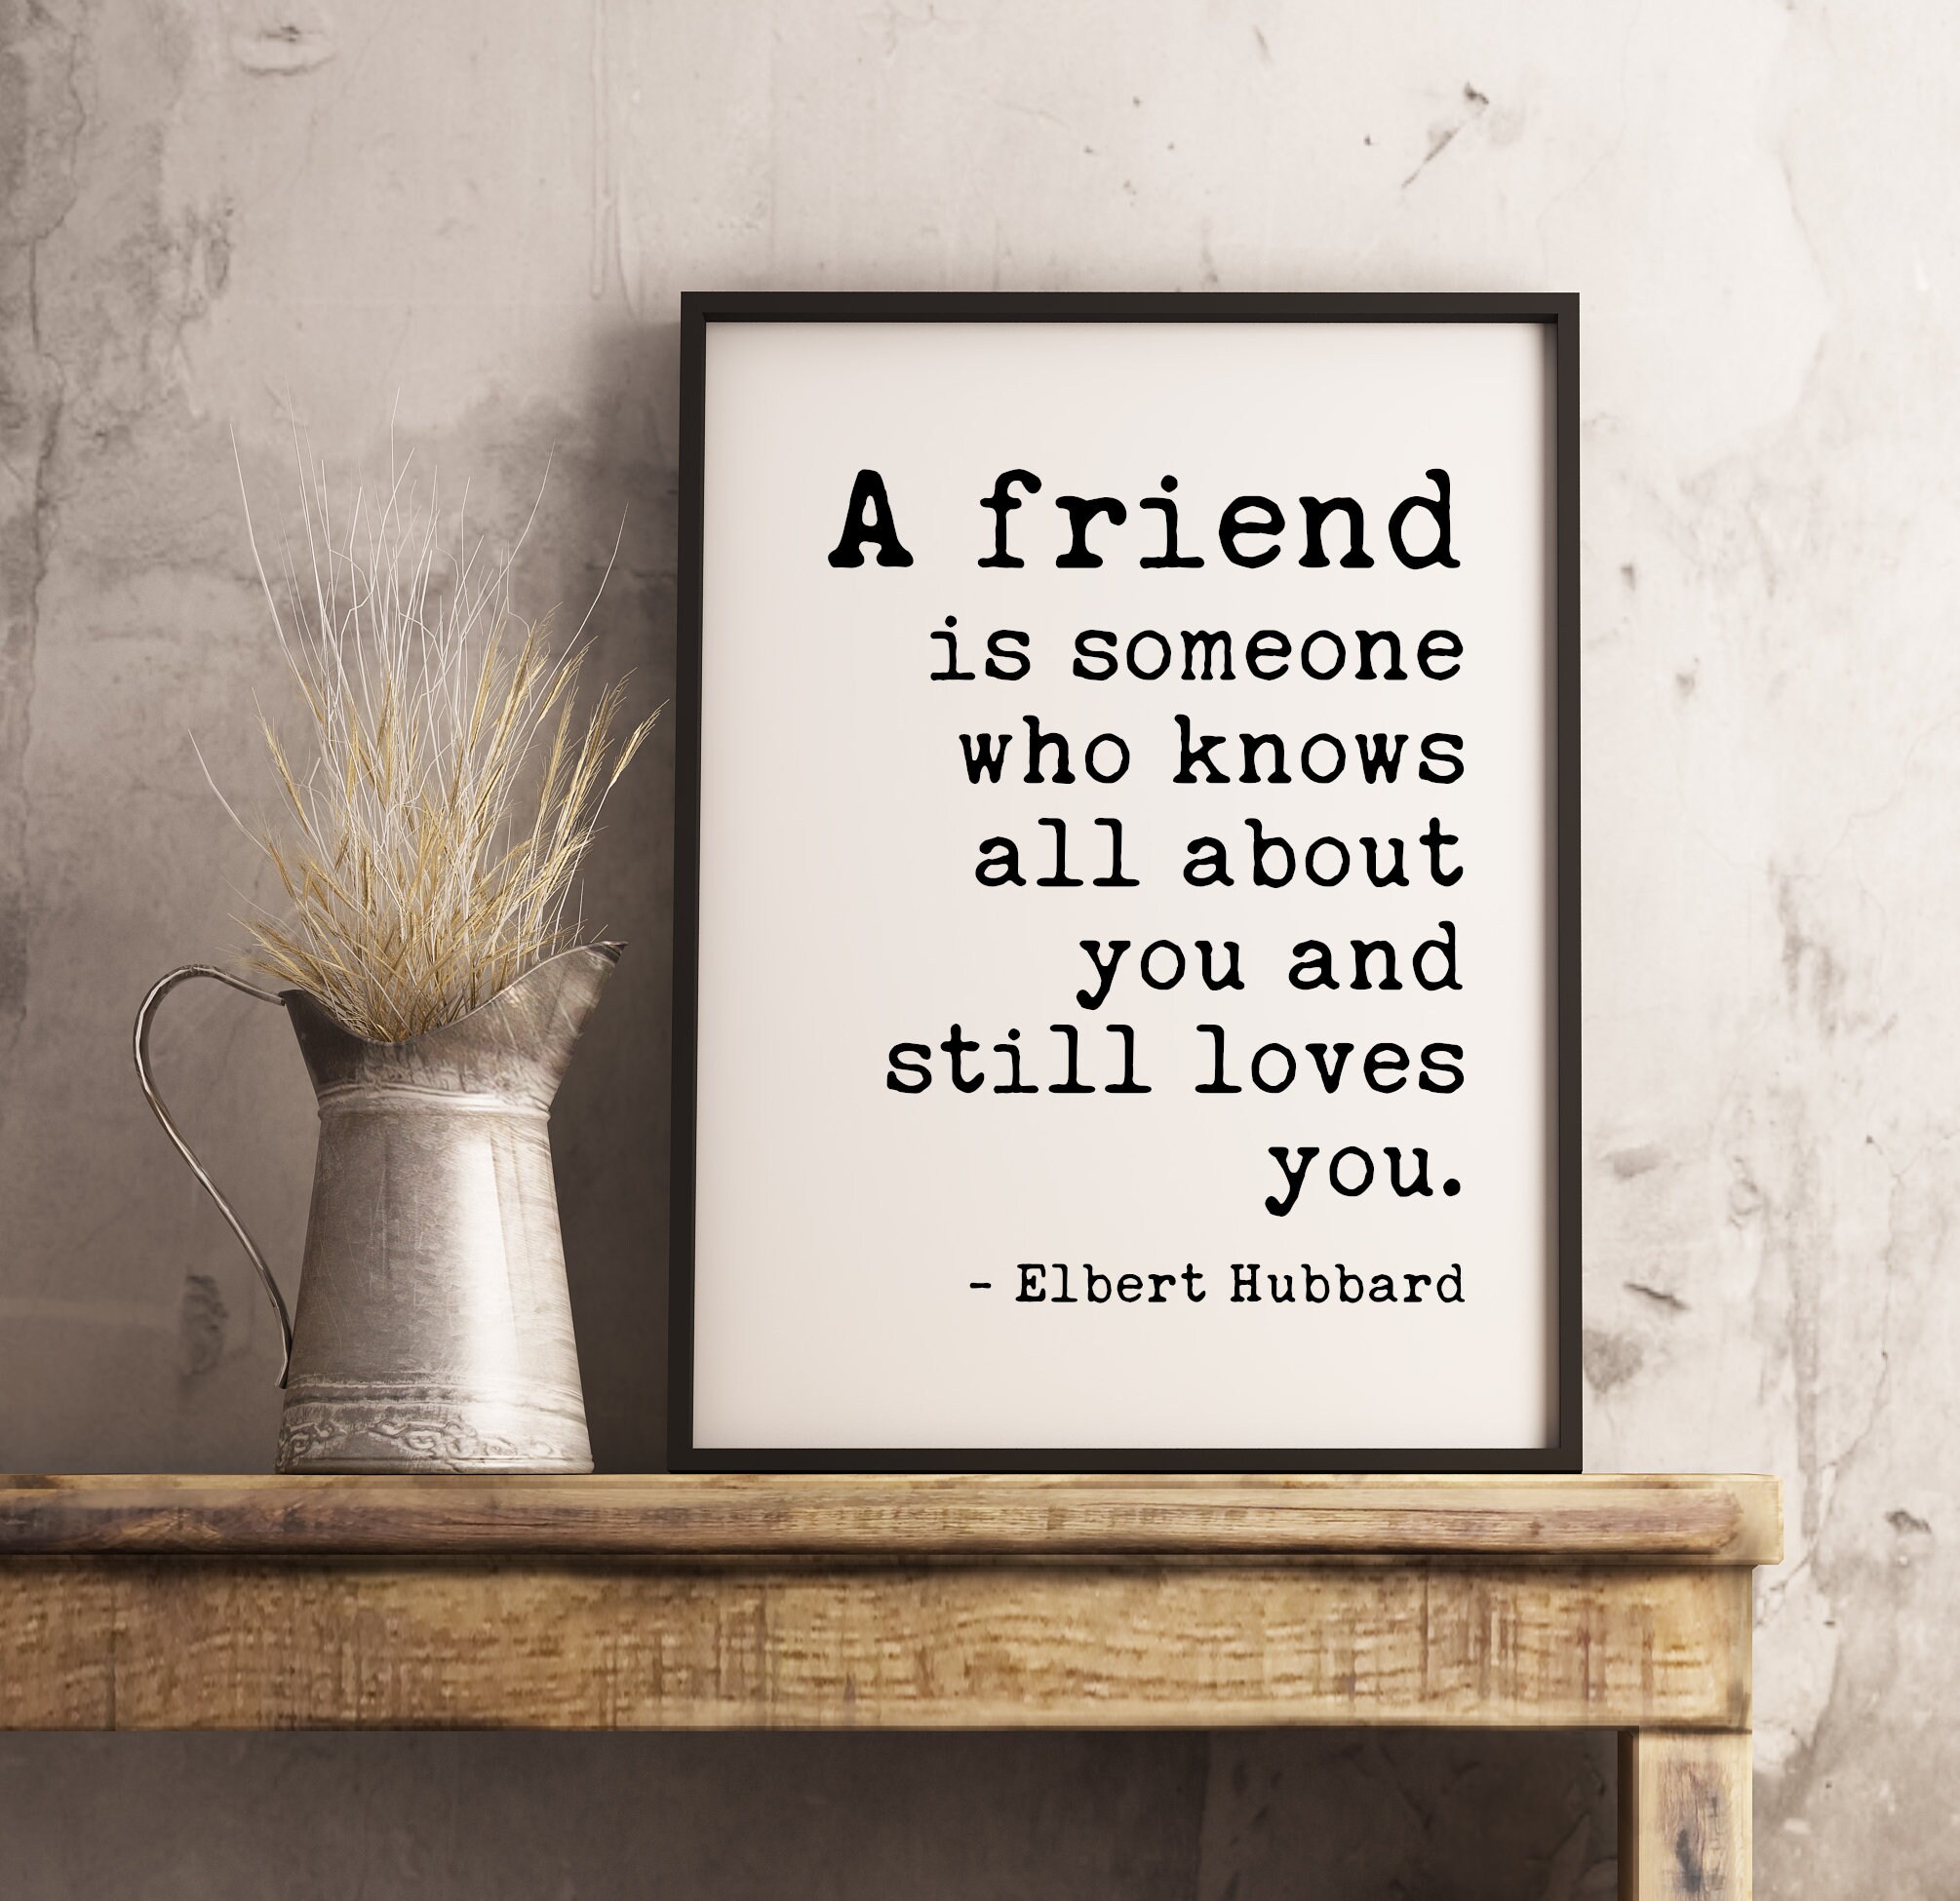 Your Friendship is a Gift I will Always Treasure with all of My Heart @  FriendsQuotation.Com